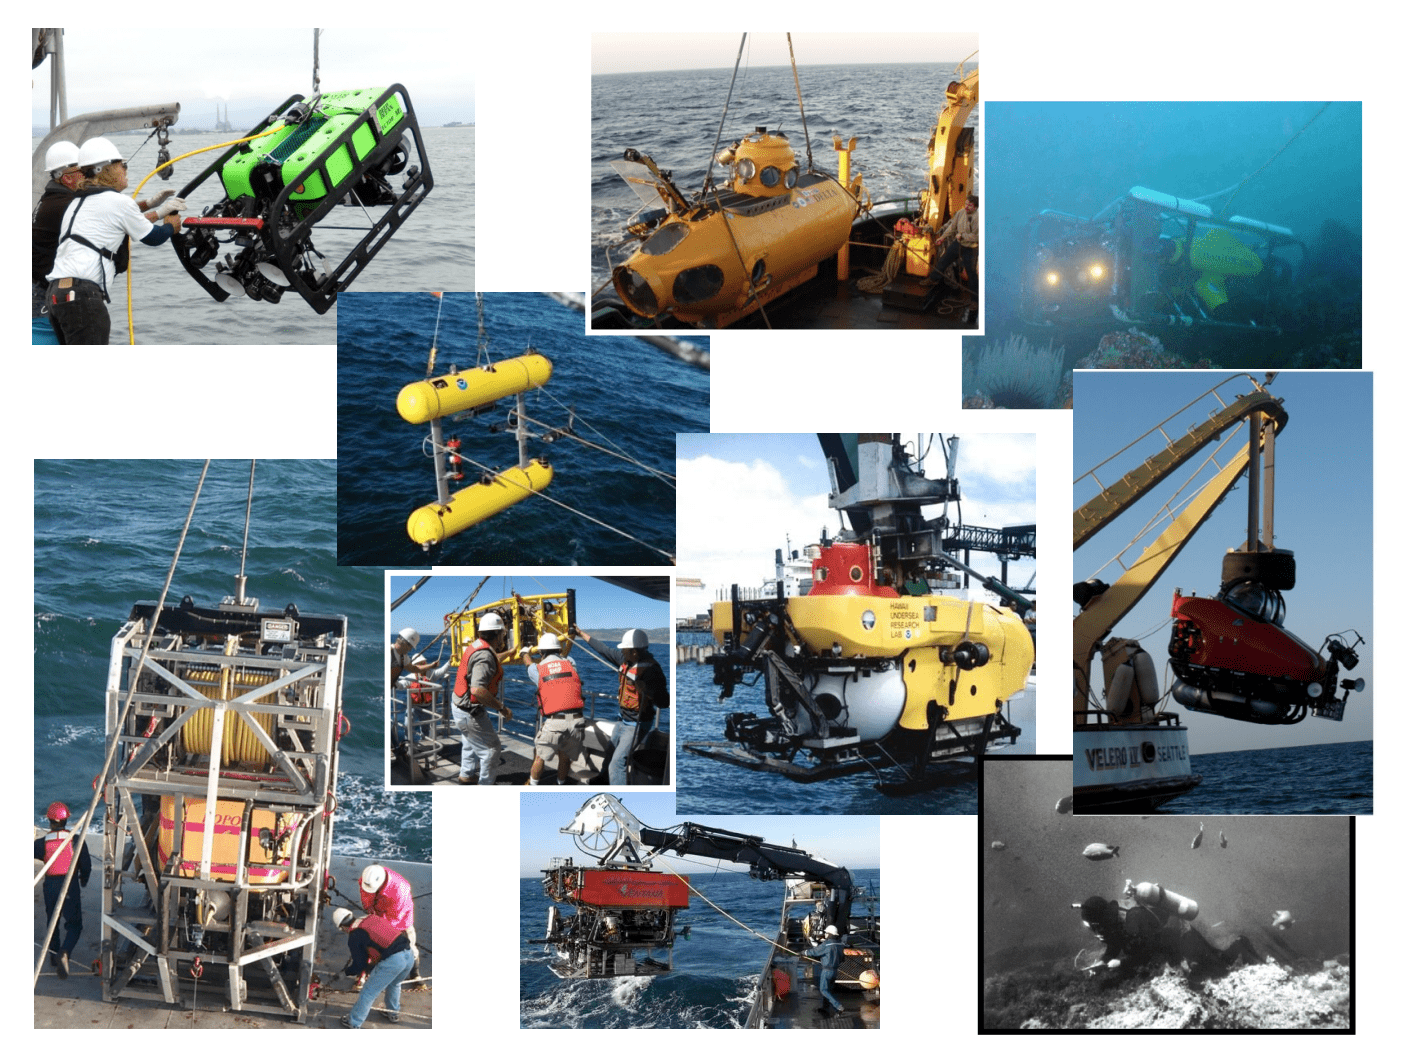 June 2015 - A COMPARATIVE ASSESSMENT OF UNDERWATER VISUAL SURVEY TOOLS: 21